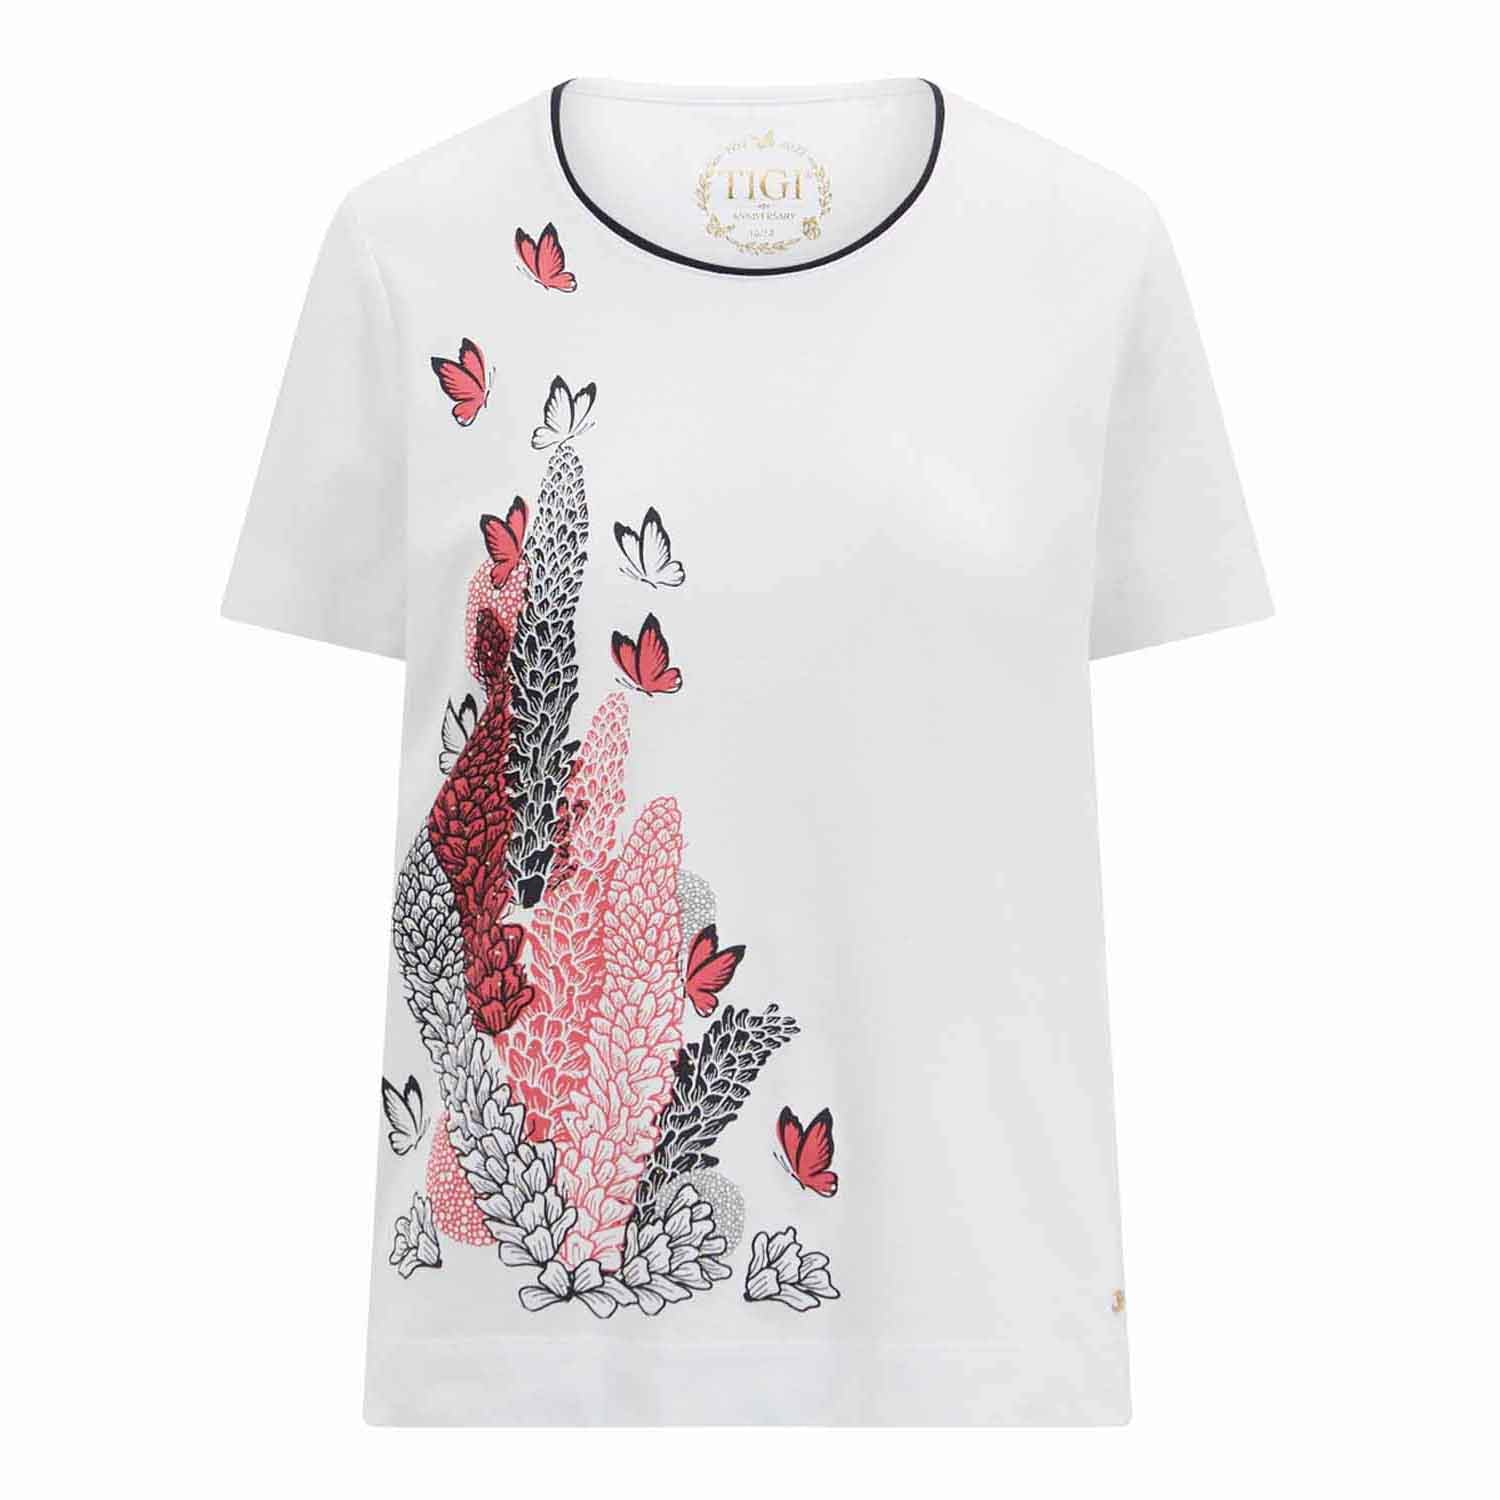 Tigiwear Butterfly Placement Print Top - White 4 Shaws Department Stores